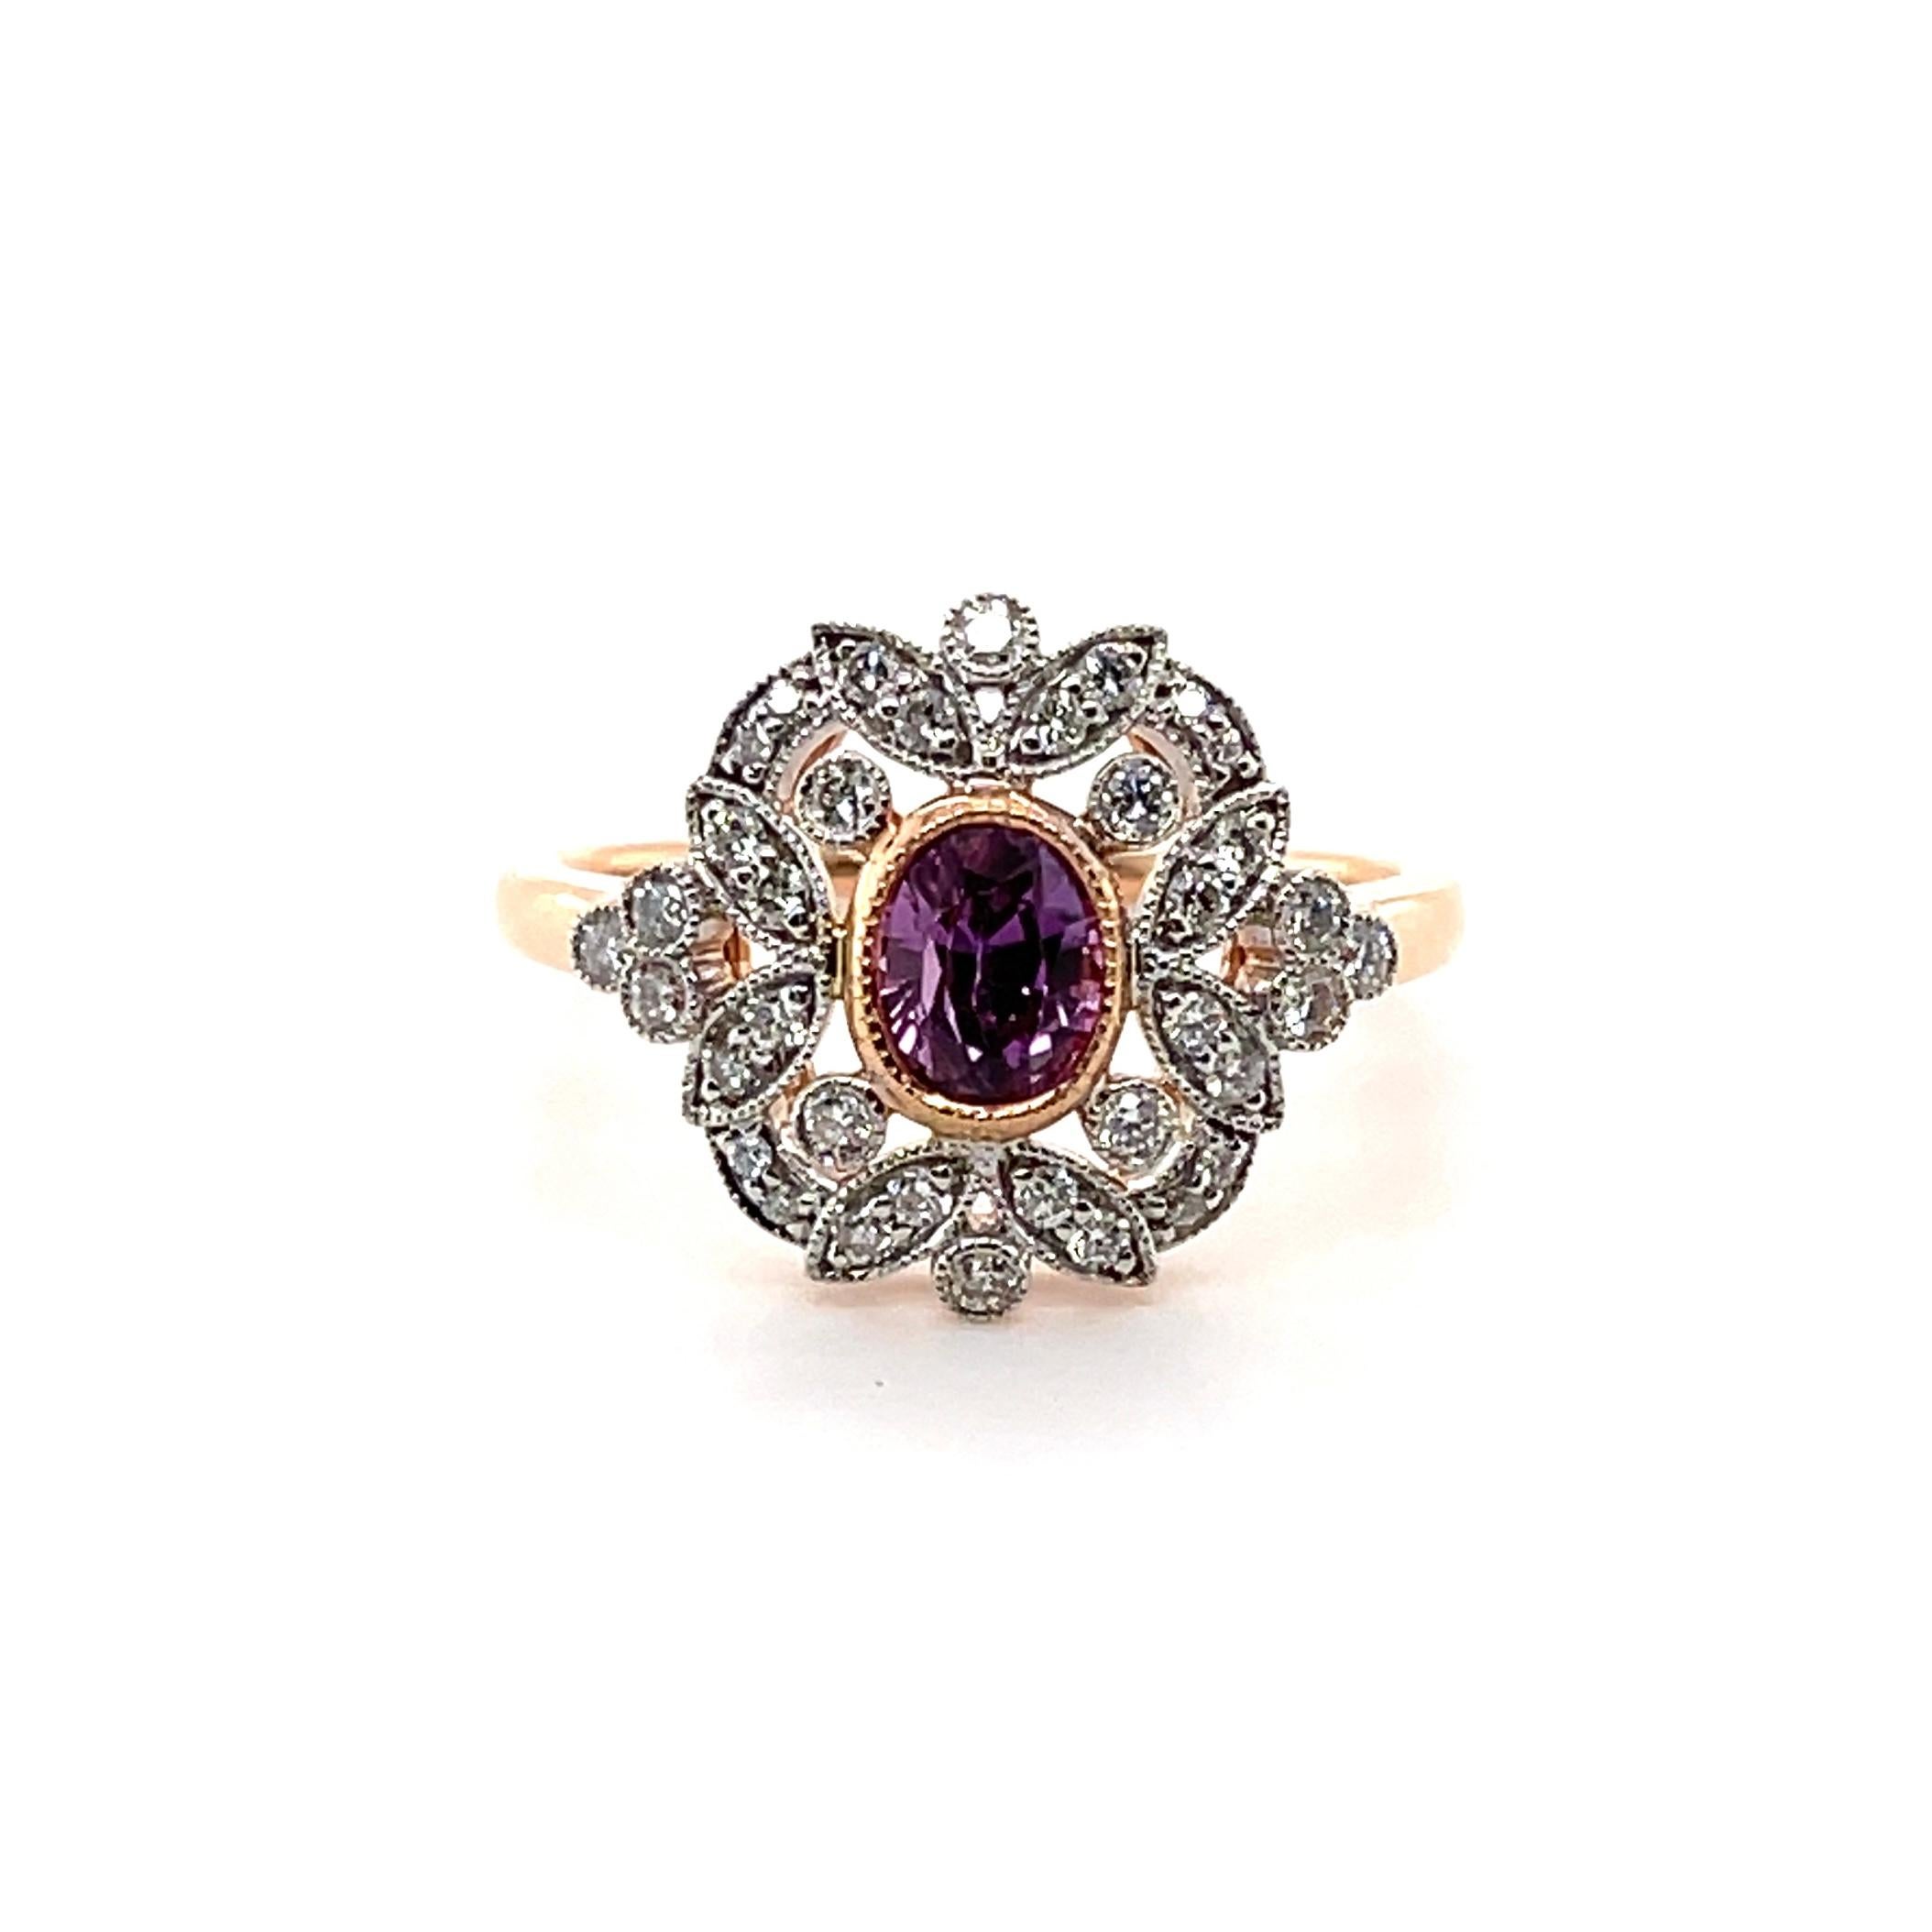 For Sale:  18ct Rose Gold 'No Heat' Pink Sapphire and Diamond Ring 5